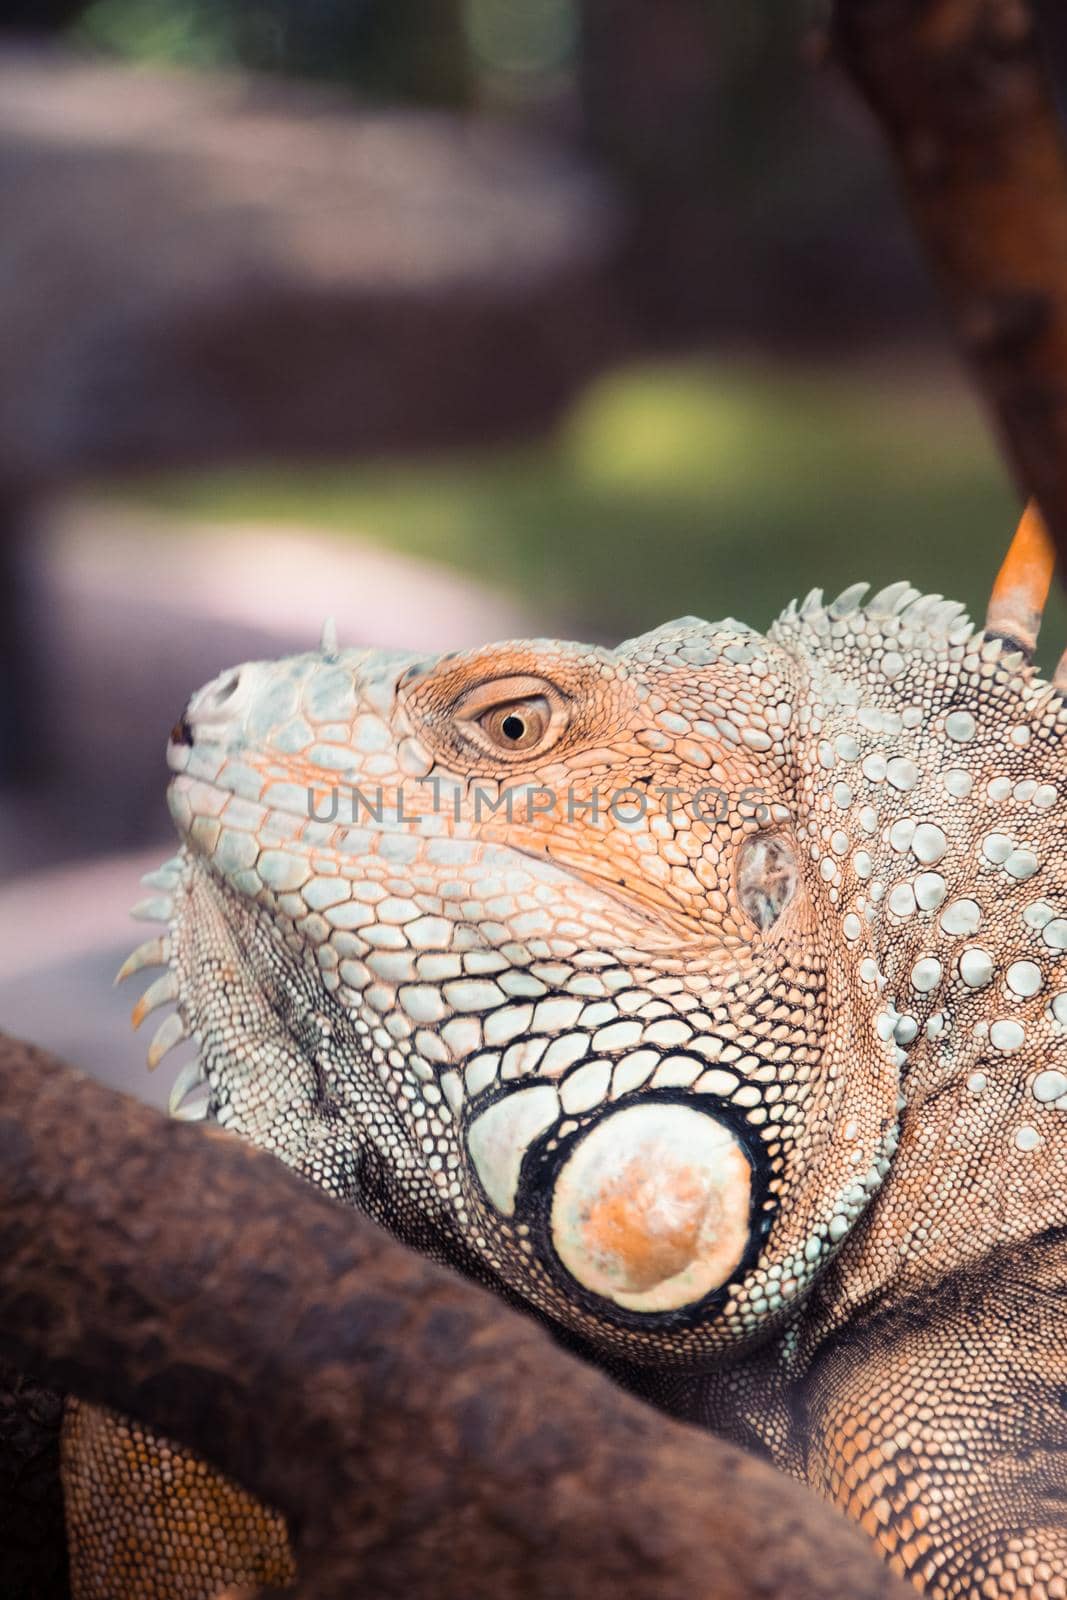 Head and eye of a green iguana by raphtong